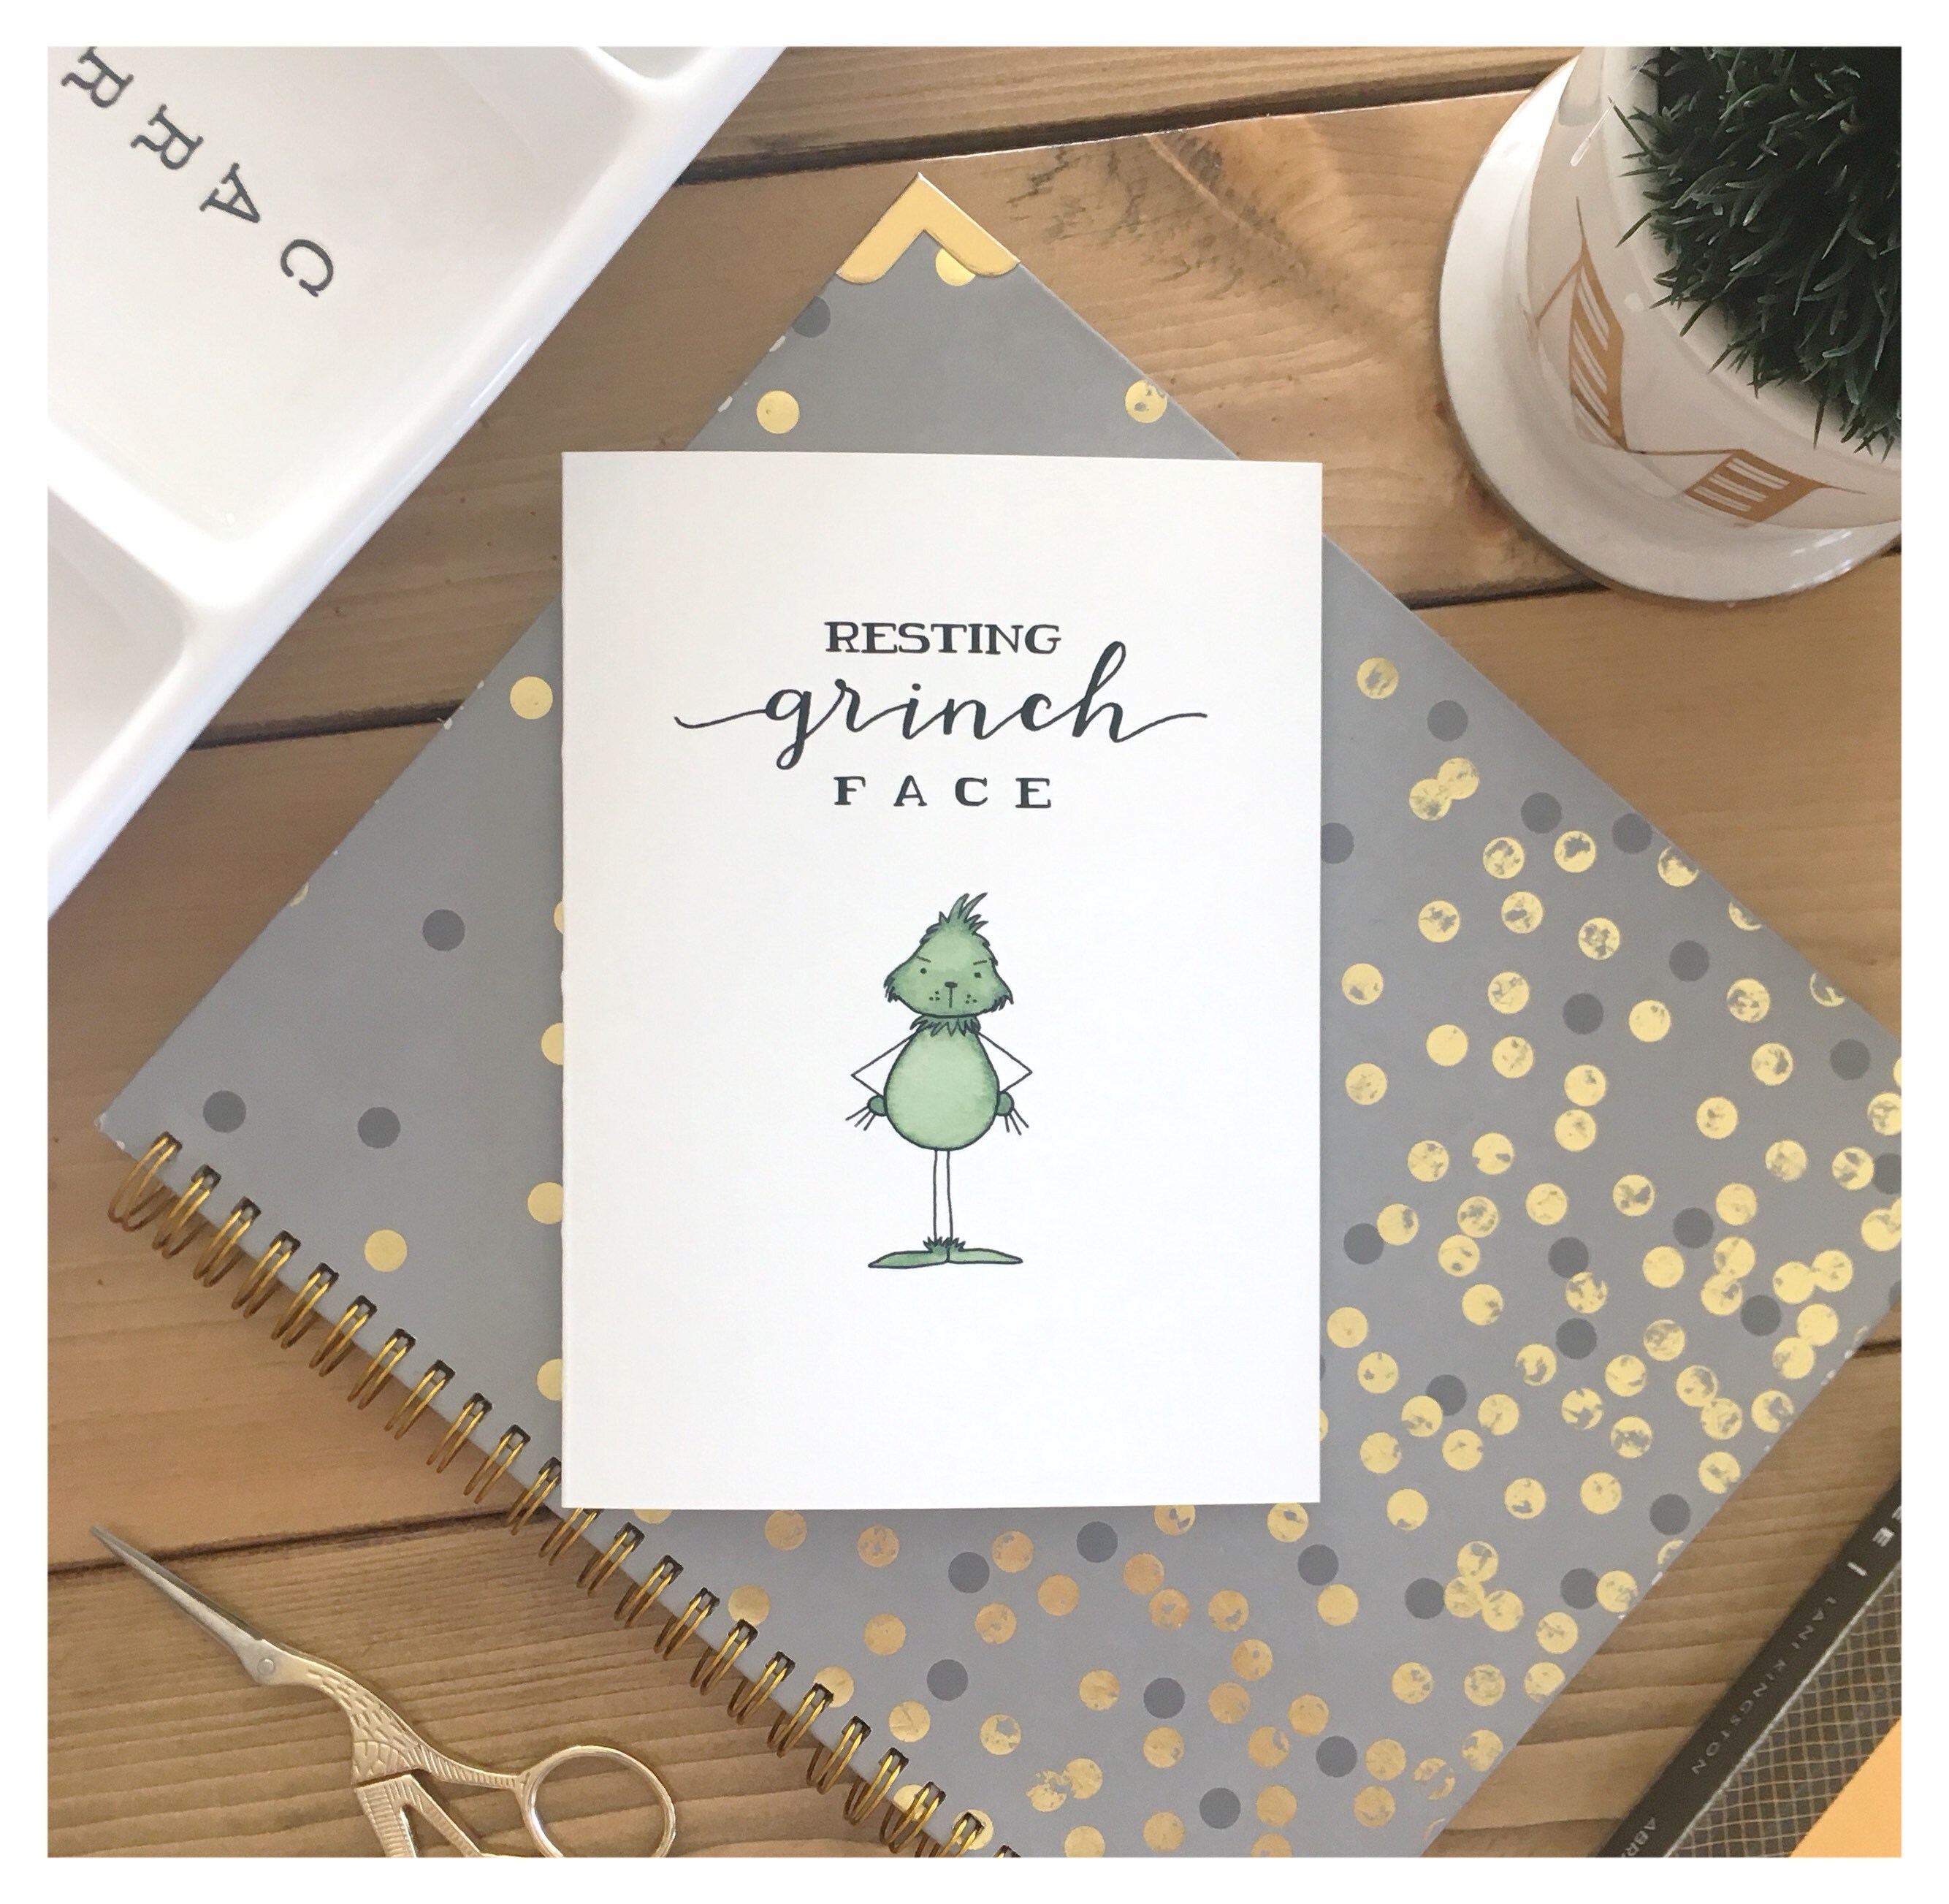 Resting GRINCH Face funny card greeting card grinch christmas card birthday card t grumpy dr seuss punny pun pop culture